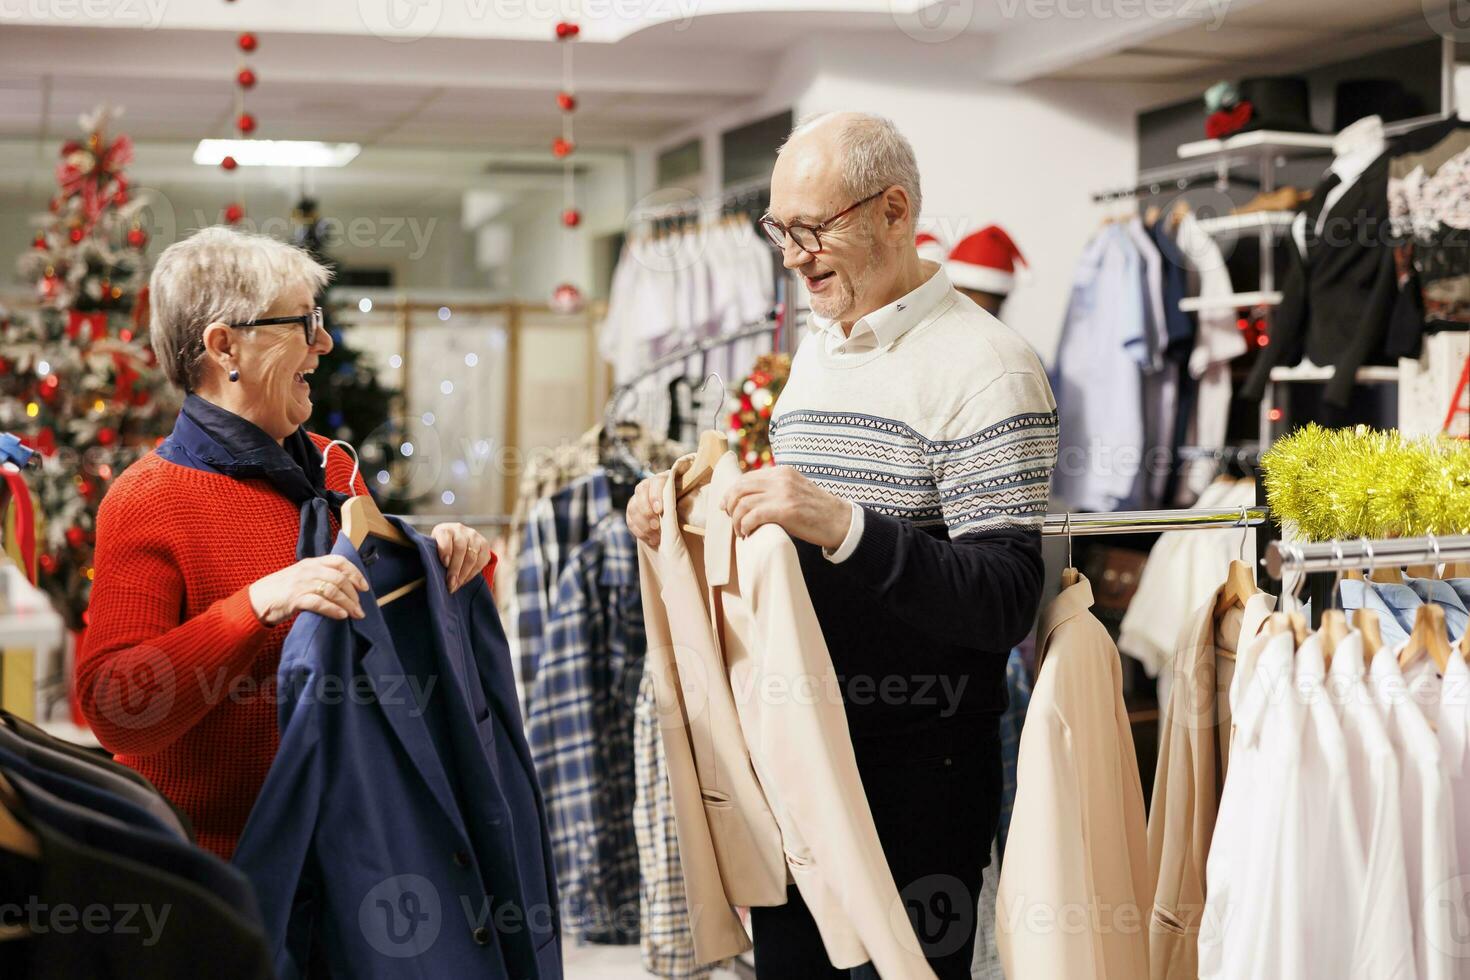 Senior people searching for jackets in retail store with festive ornaments,  buying clothes as presents for family on christmas eve. Cheerful couple  browsing through merchandise on sale. 33861738 Stock Photo at Vecteezy